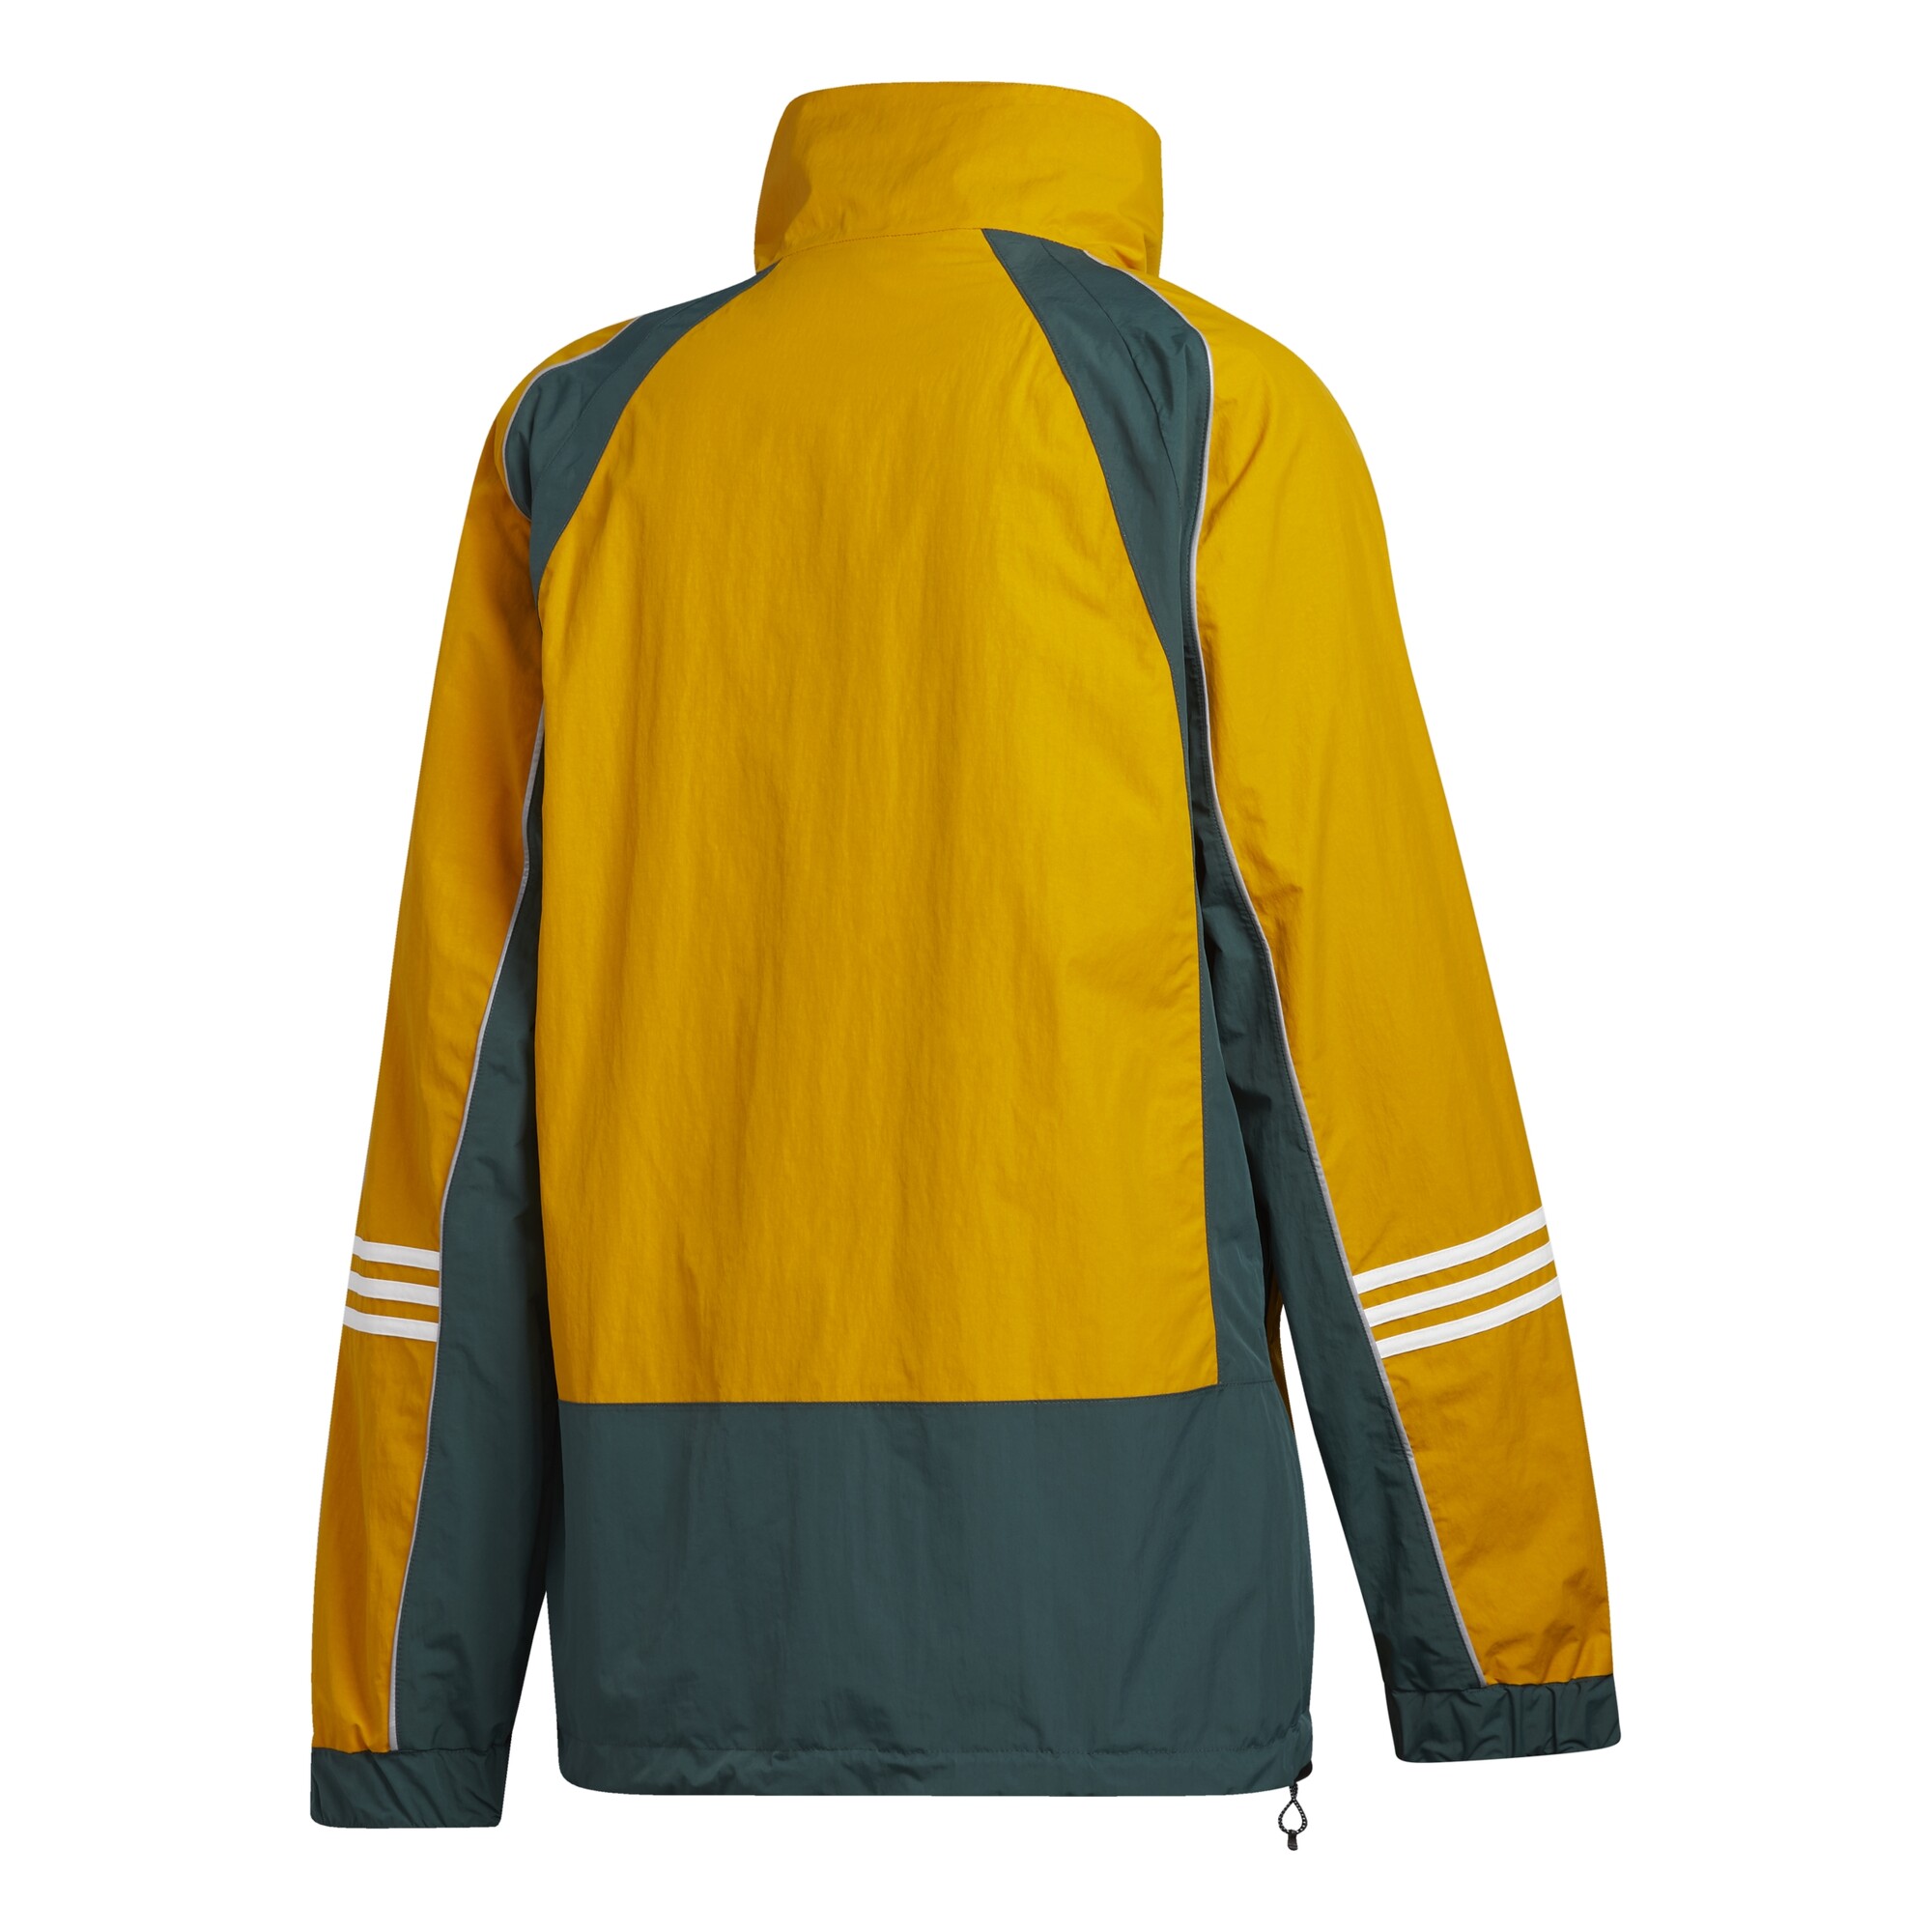 Adidas DNA jacket legacy gold / mineral green / white